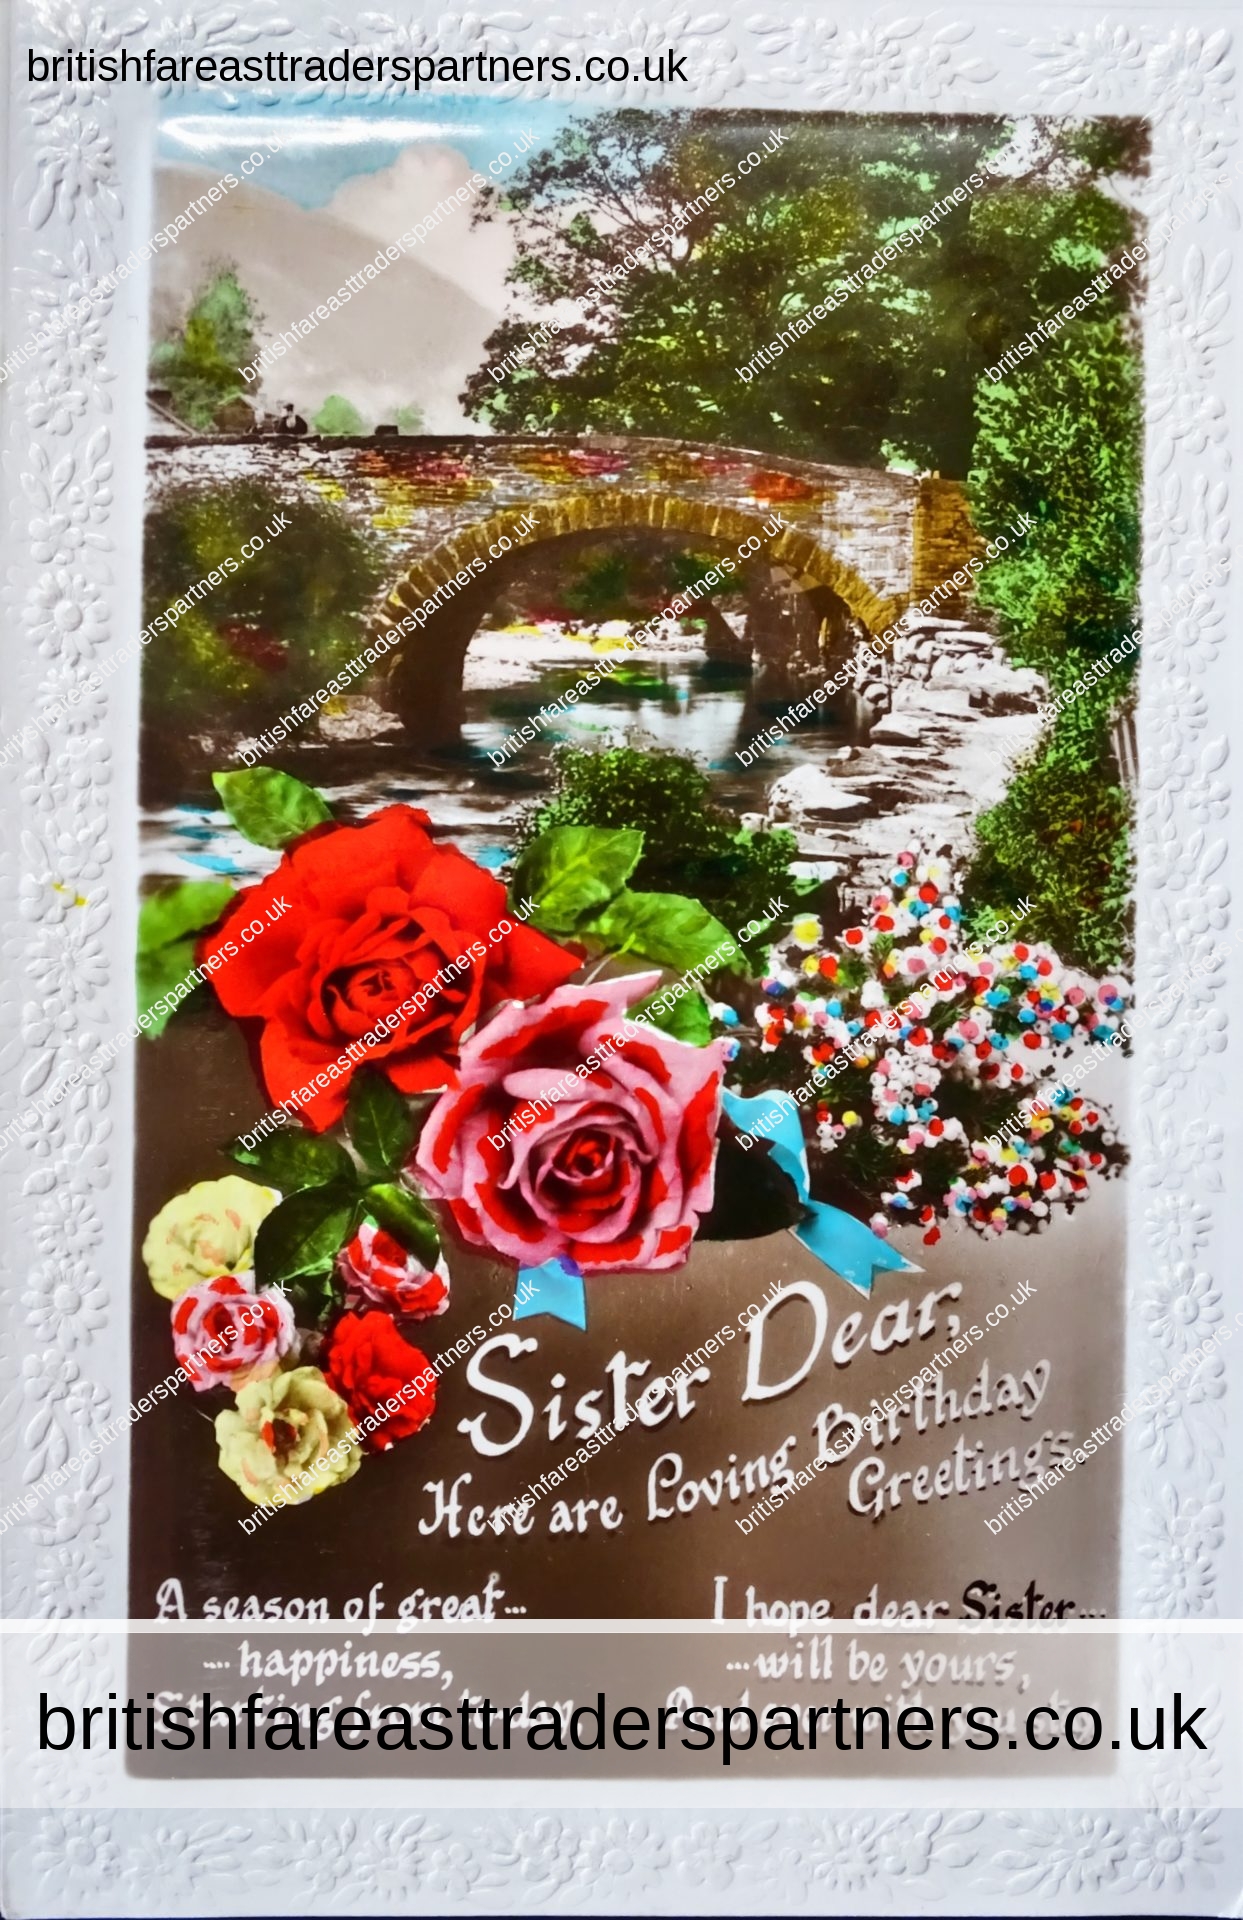 VINTAGE SISTER’S BIRTHDAY GREETINGS CARD RIVER STREAM BRIDGE NATURE FLOWERS COLLECTABLES | POSTCARDS | BIRTHDAY GREETINGS PRINTED IN ENGLAND